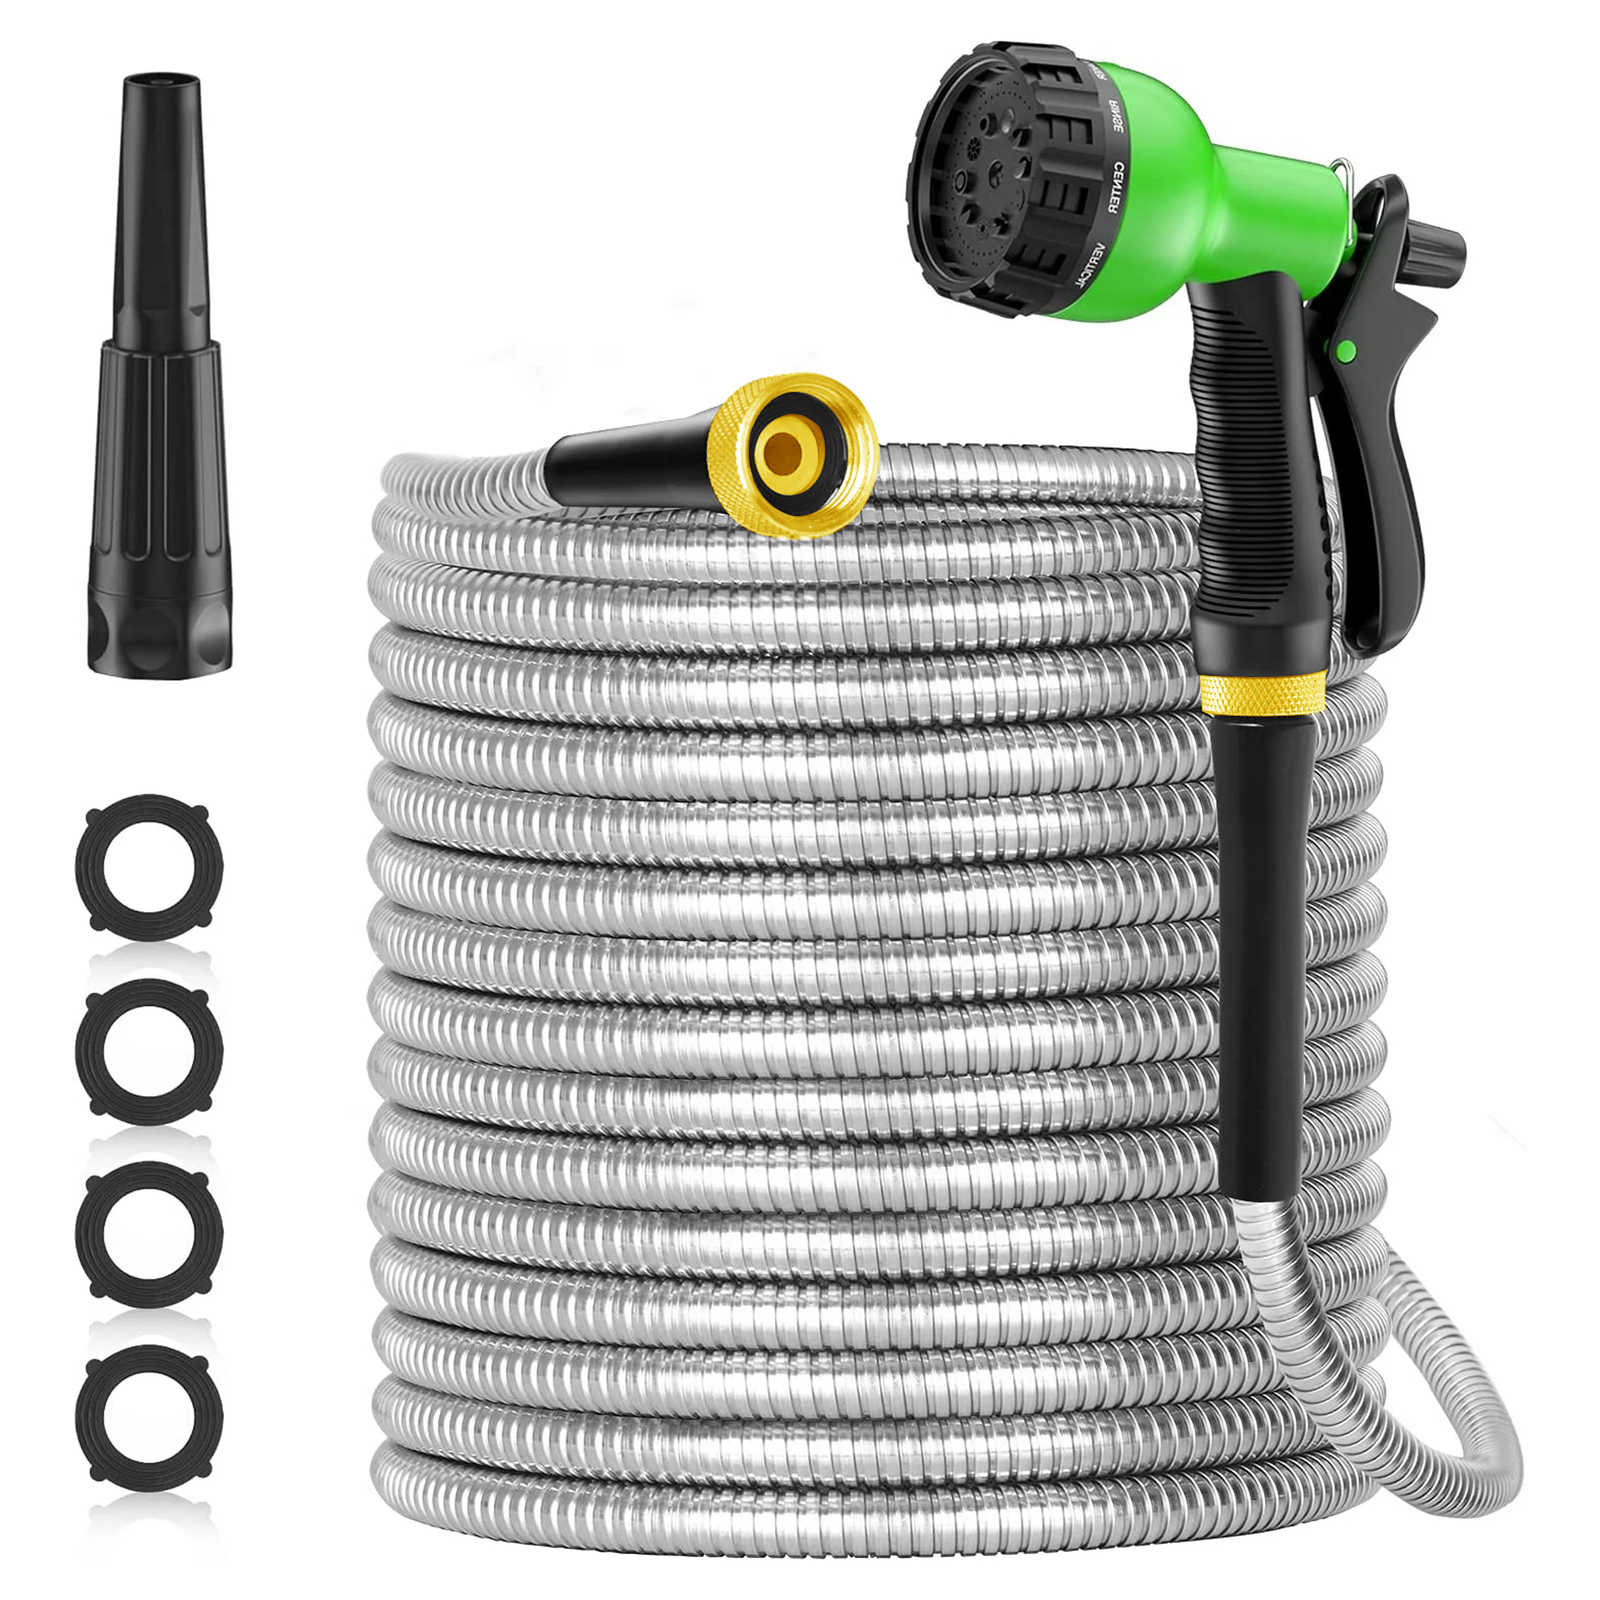 

50ft,100ft 304 Stainless Steel Garden Hose Metal, Heavy Duty Water Hoses With Nozzles For Yard, Outdoor - Flexible, Never Kink & , Puncture Resistant (sliver)